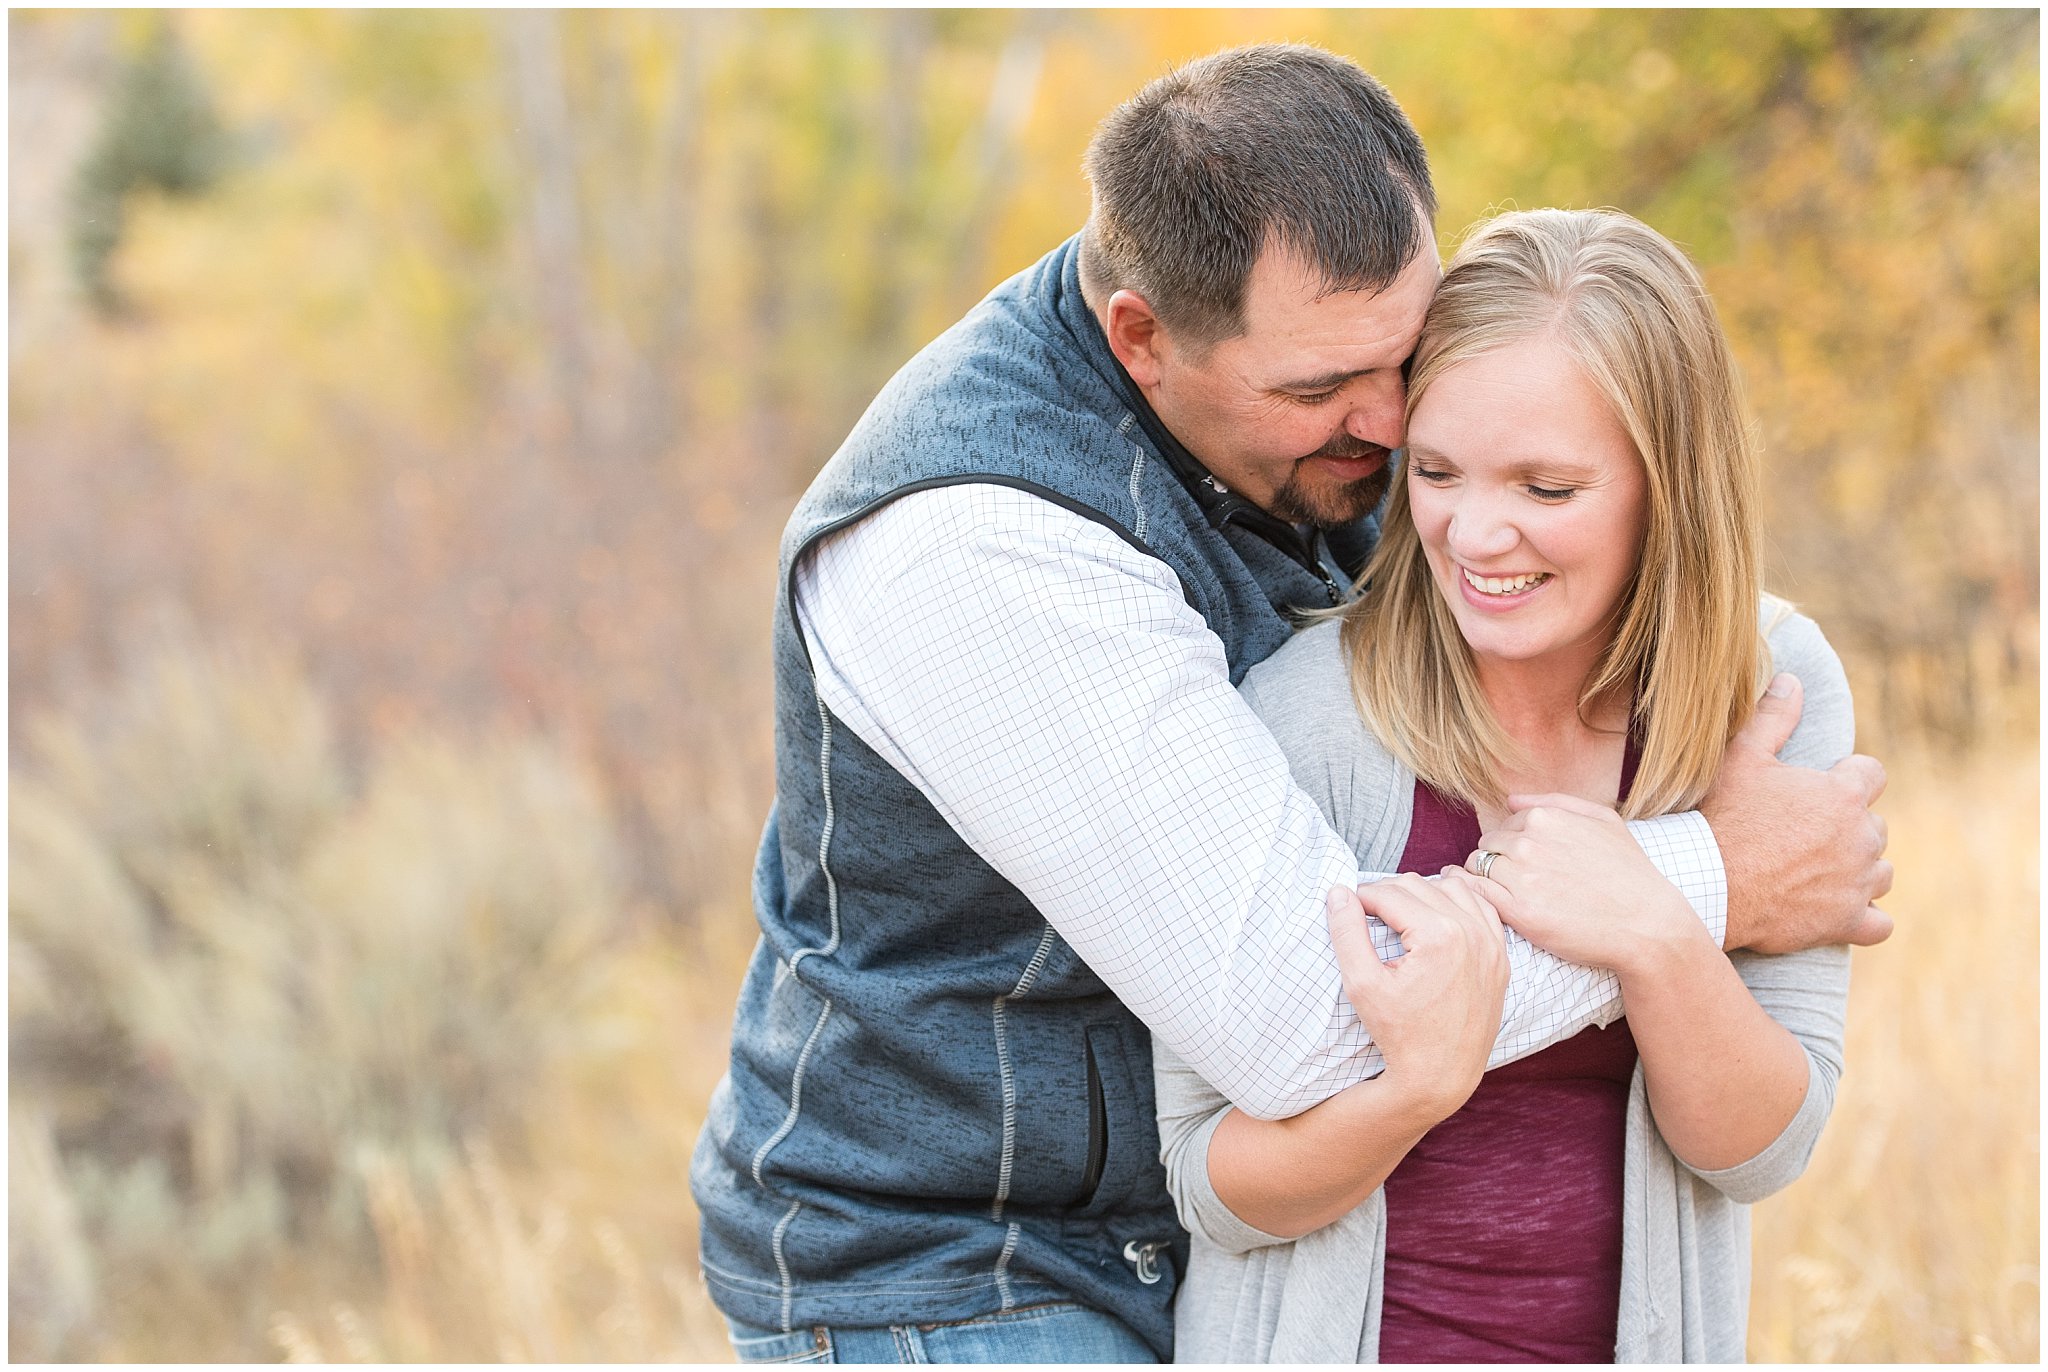 Candid couple picture | Fall family photo session at Snowbasin | Snowbasin Resort | Jessie and Dallin Photography